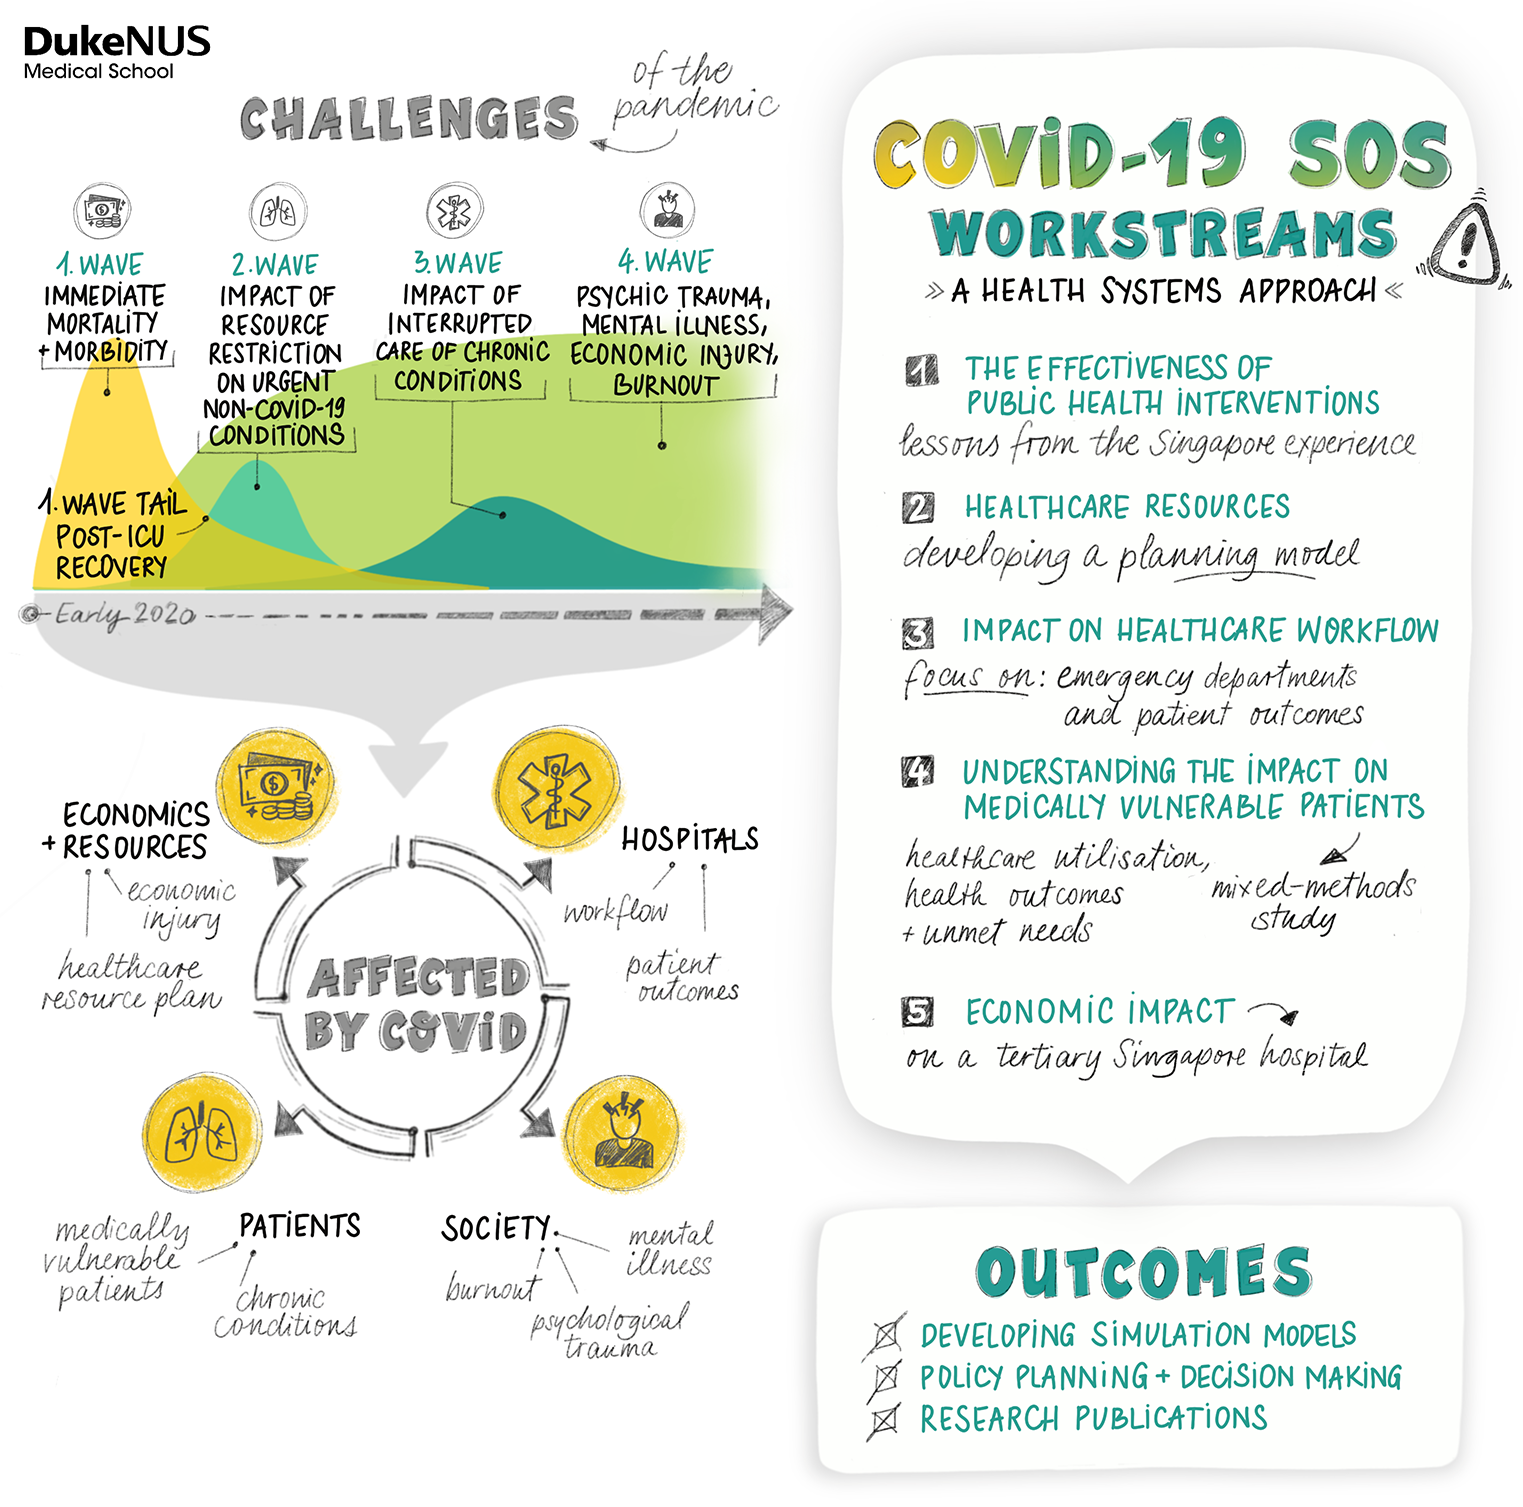 Health systems during COVID-19